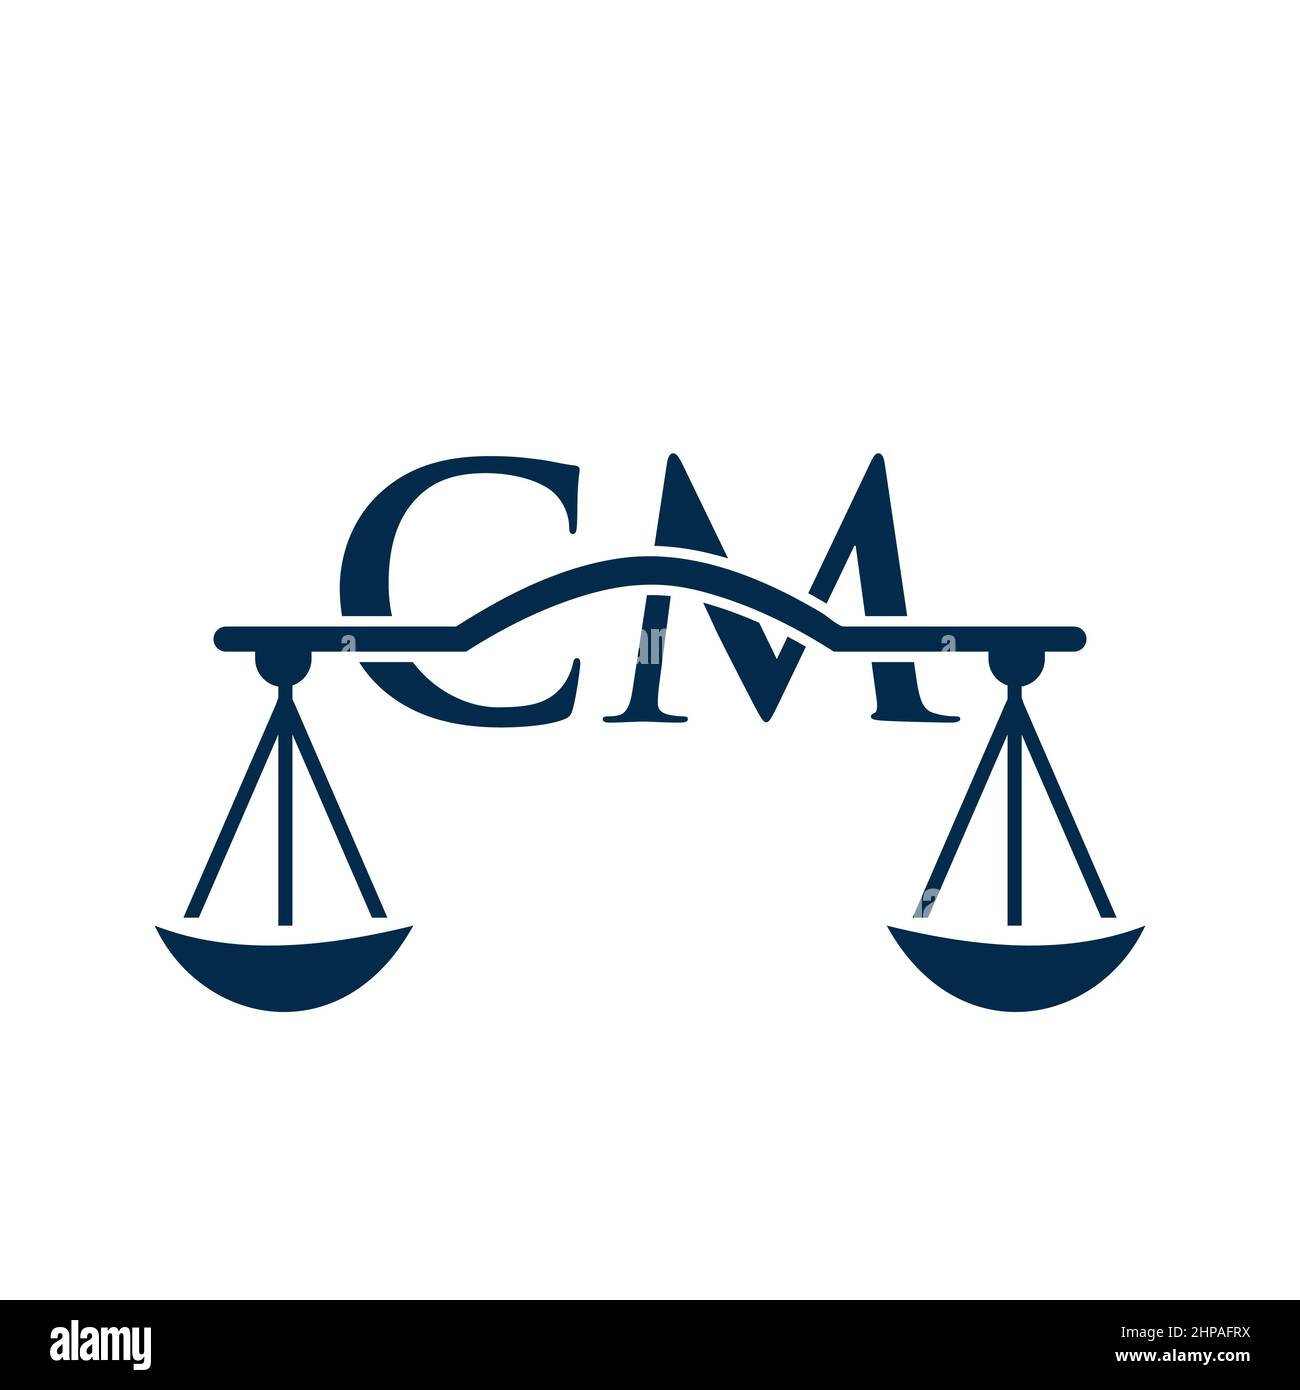 Law Firm Letter CM Logo Design. Lawyer, Justice, Law Attorney, Legal, Lawyer Service, Law Office, Scale. Law Logo On CM Letter Sign Stock Vector